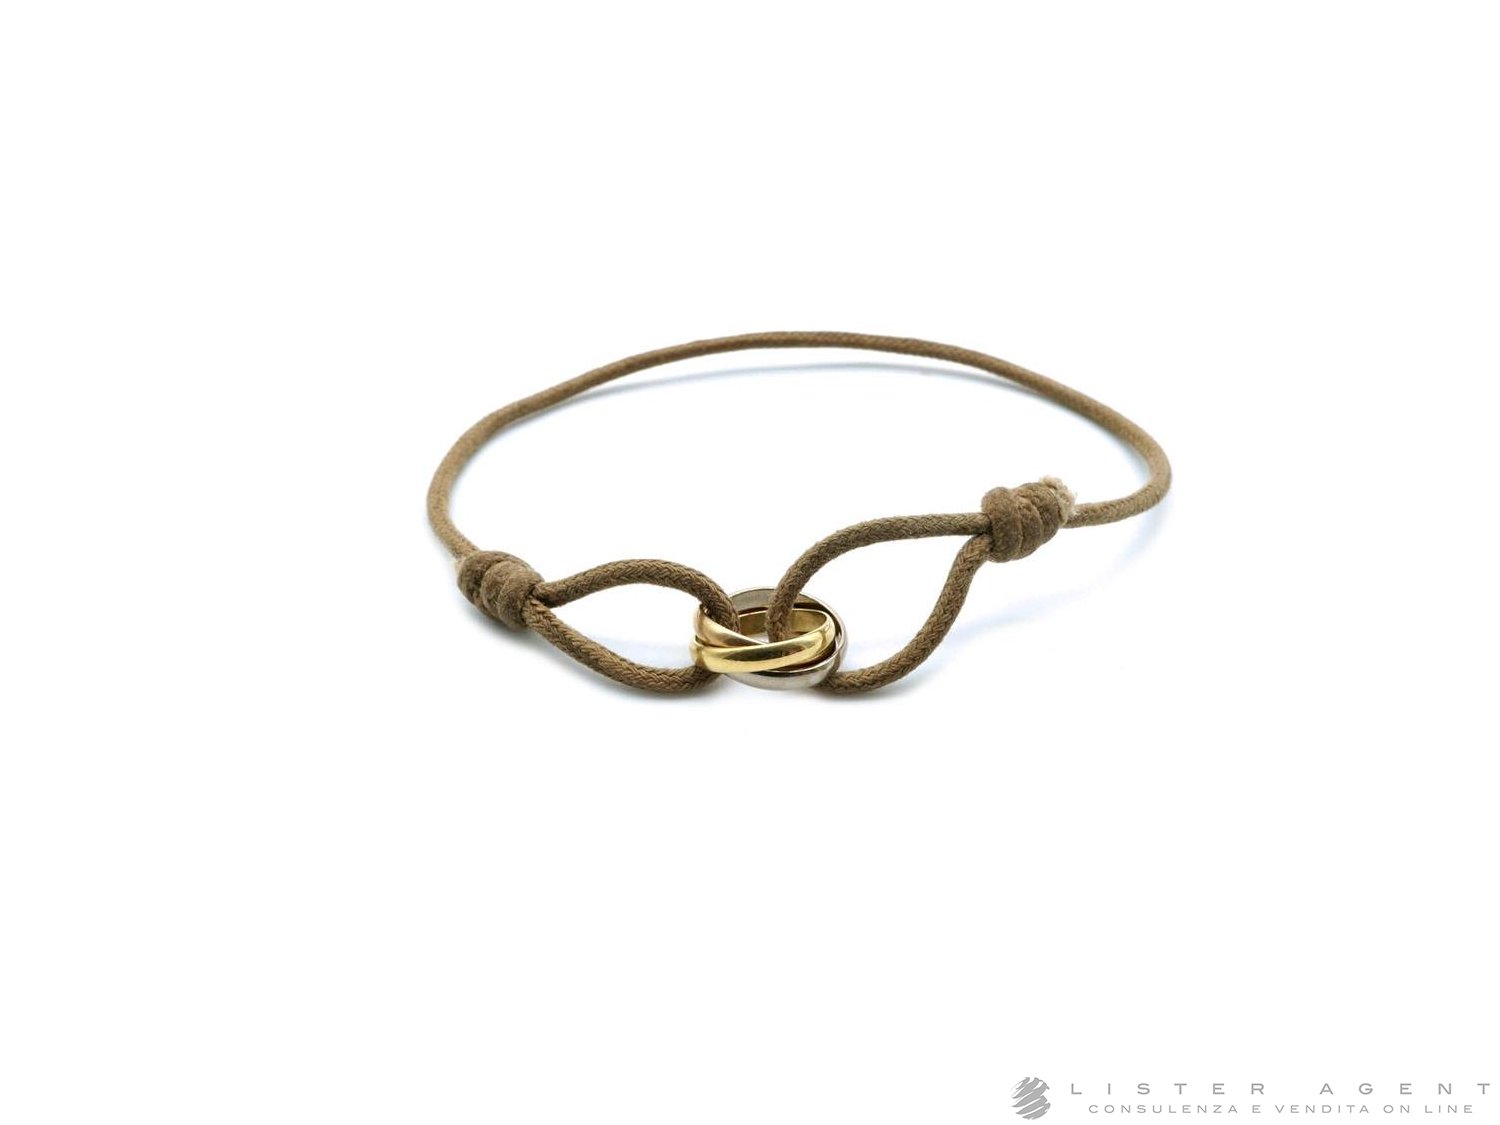 CRB6016700 - Trinity bracelet - White gold, yellow gold, rose gold - Cartier